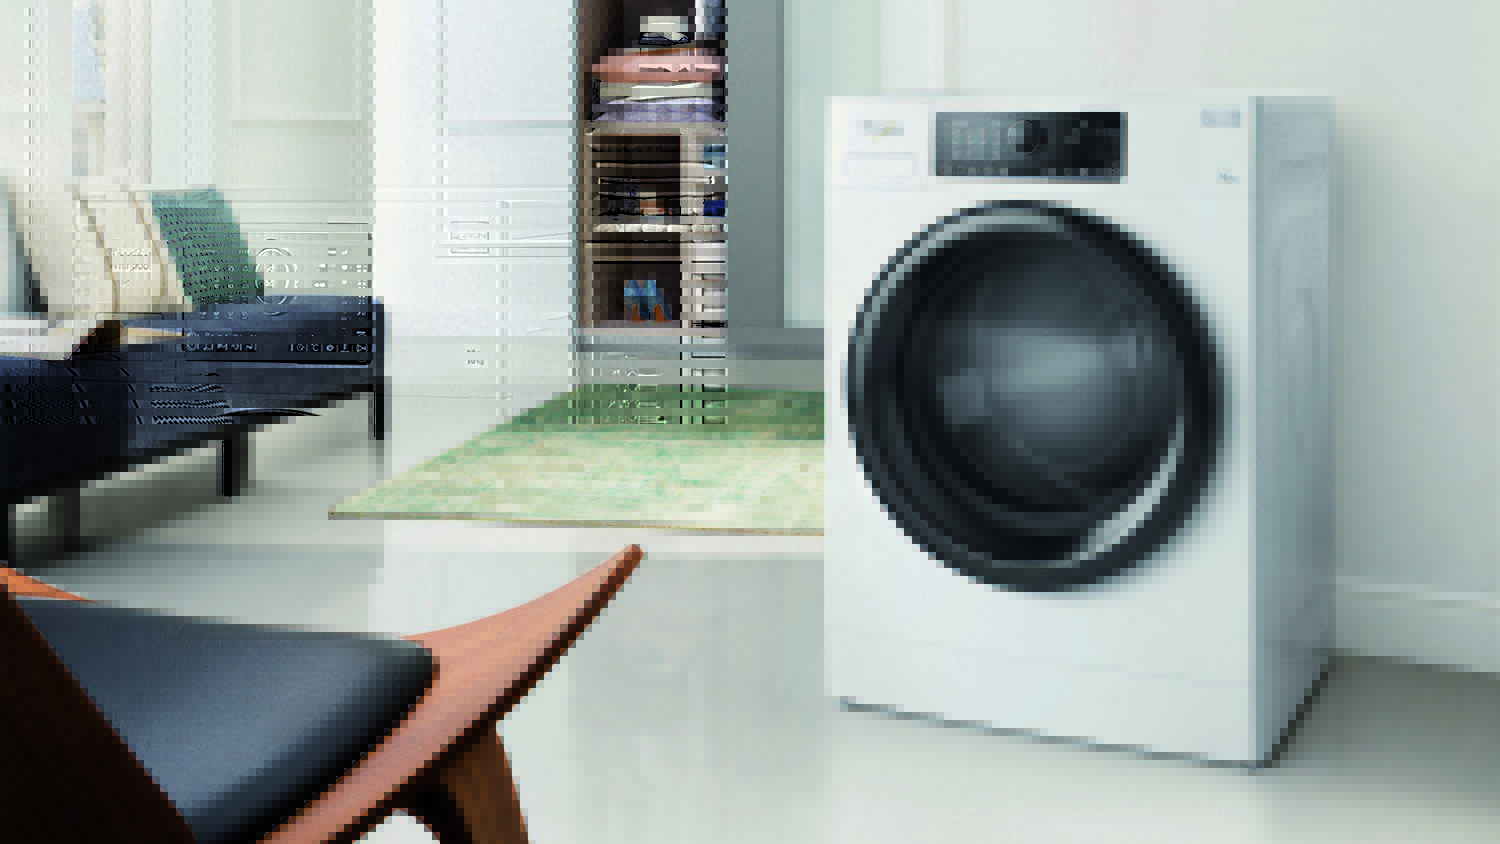 Overview of Whirlpool washing machines